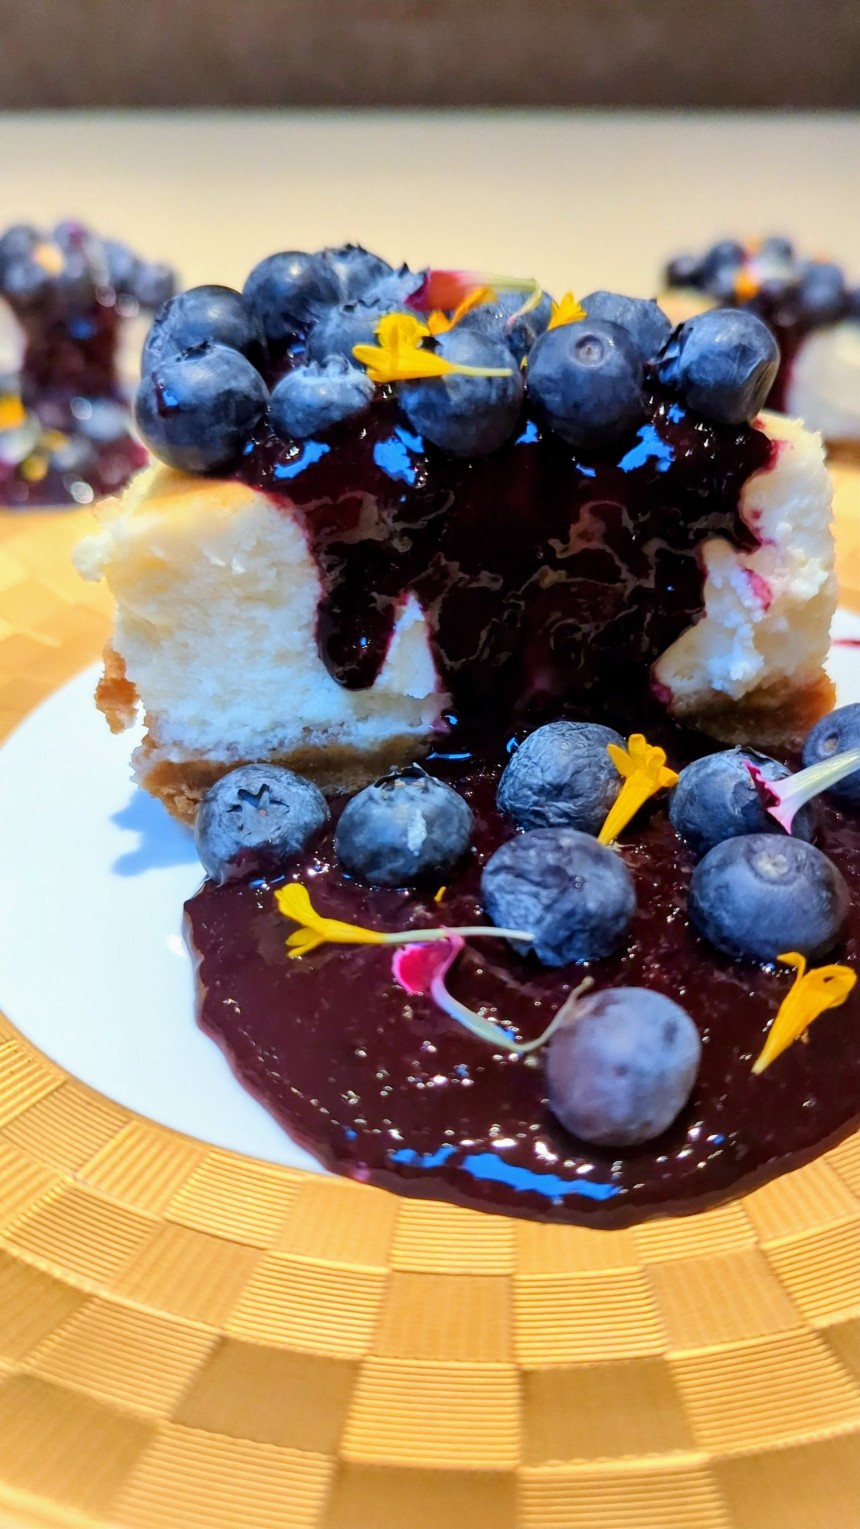 Easy Blueberry Compote You Can Make at Home